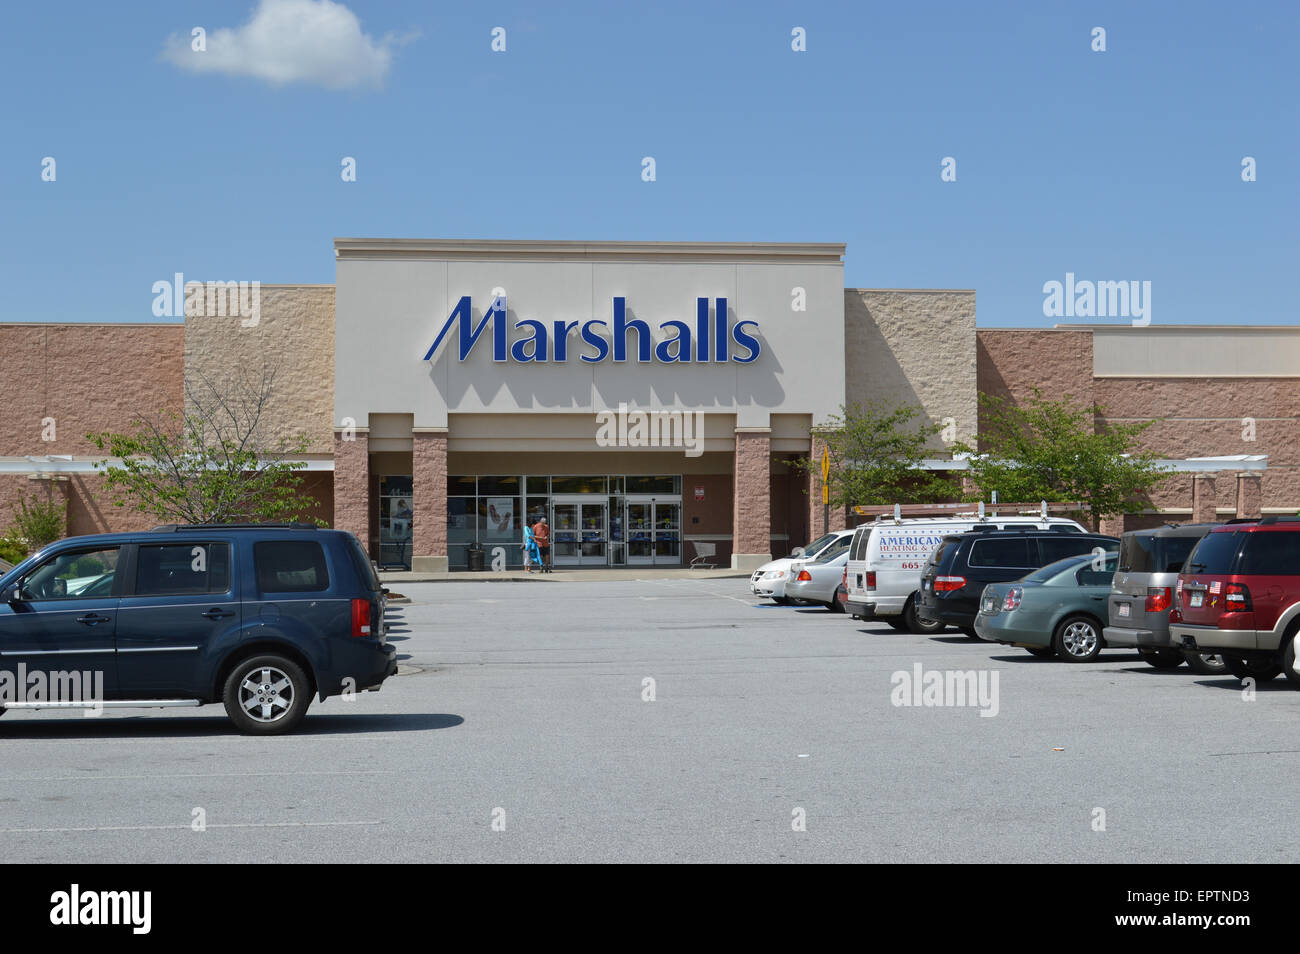 A Marshalls Store located in Hendersonville, North Carolina, USA Stock Photo